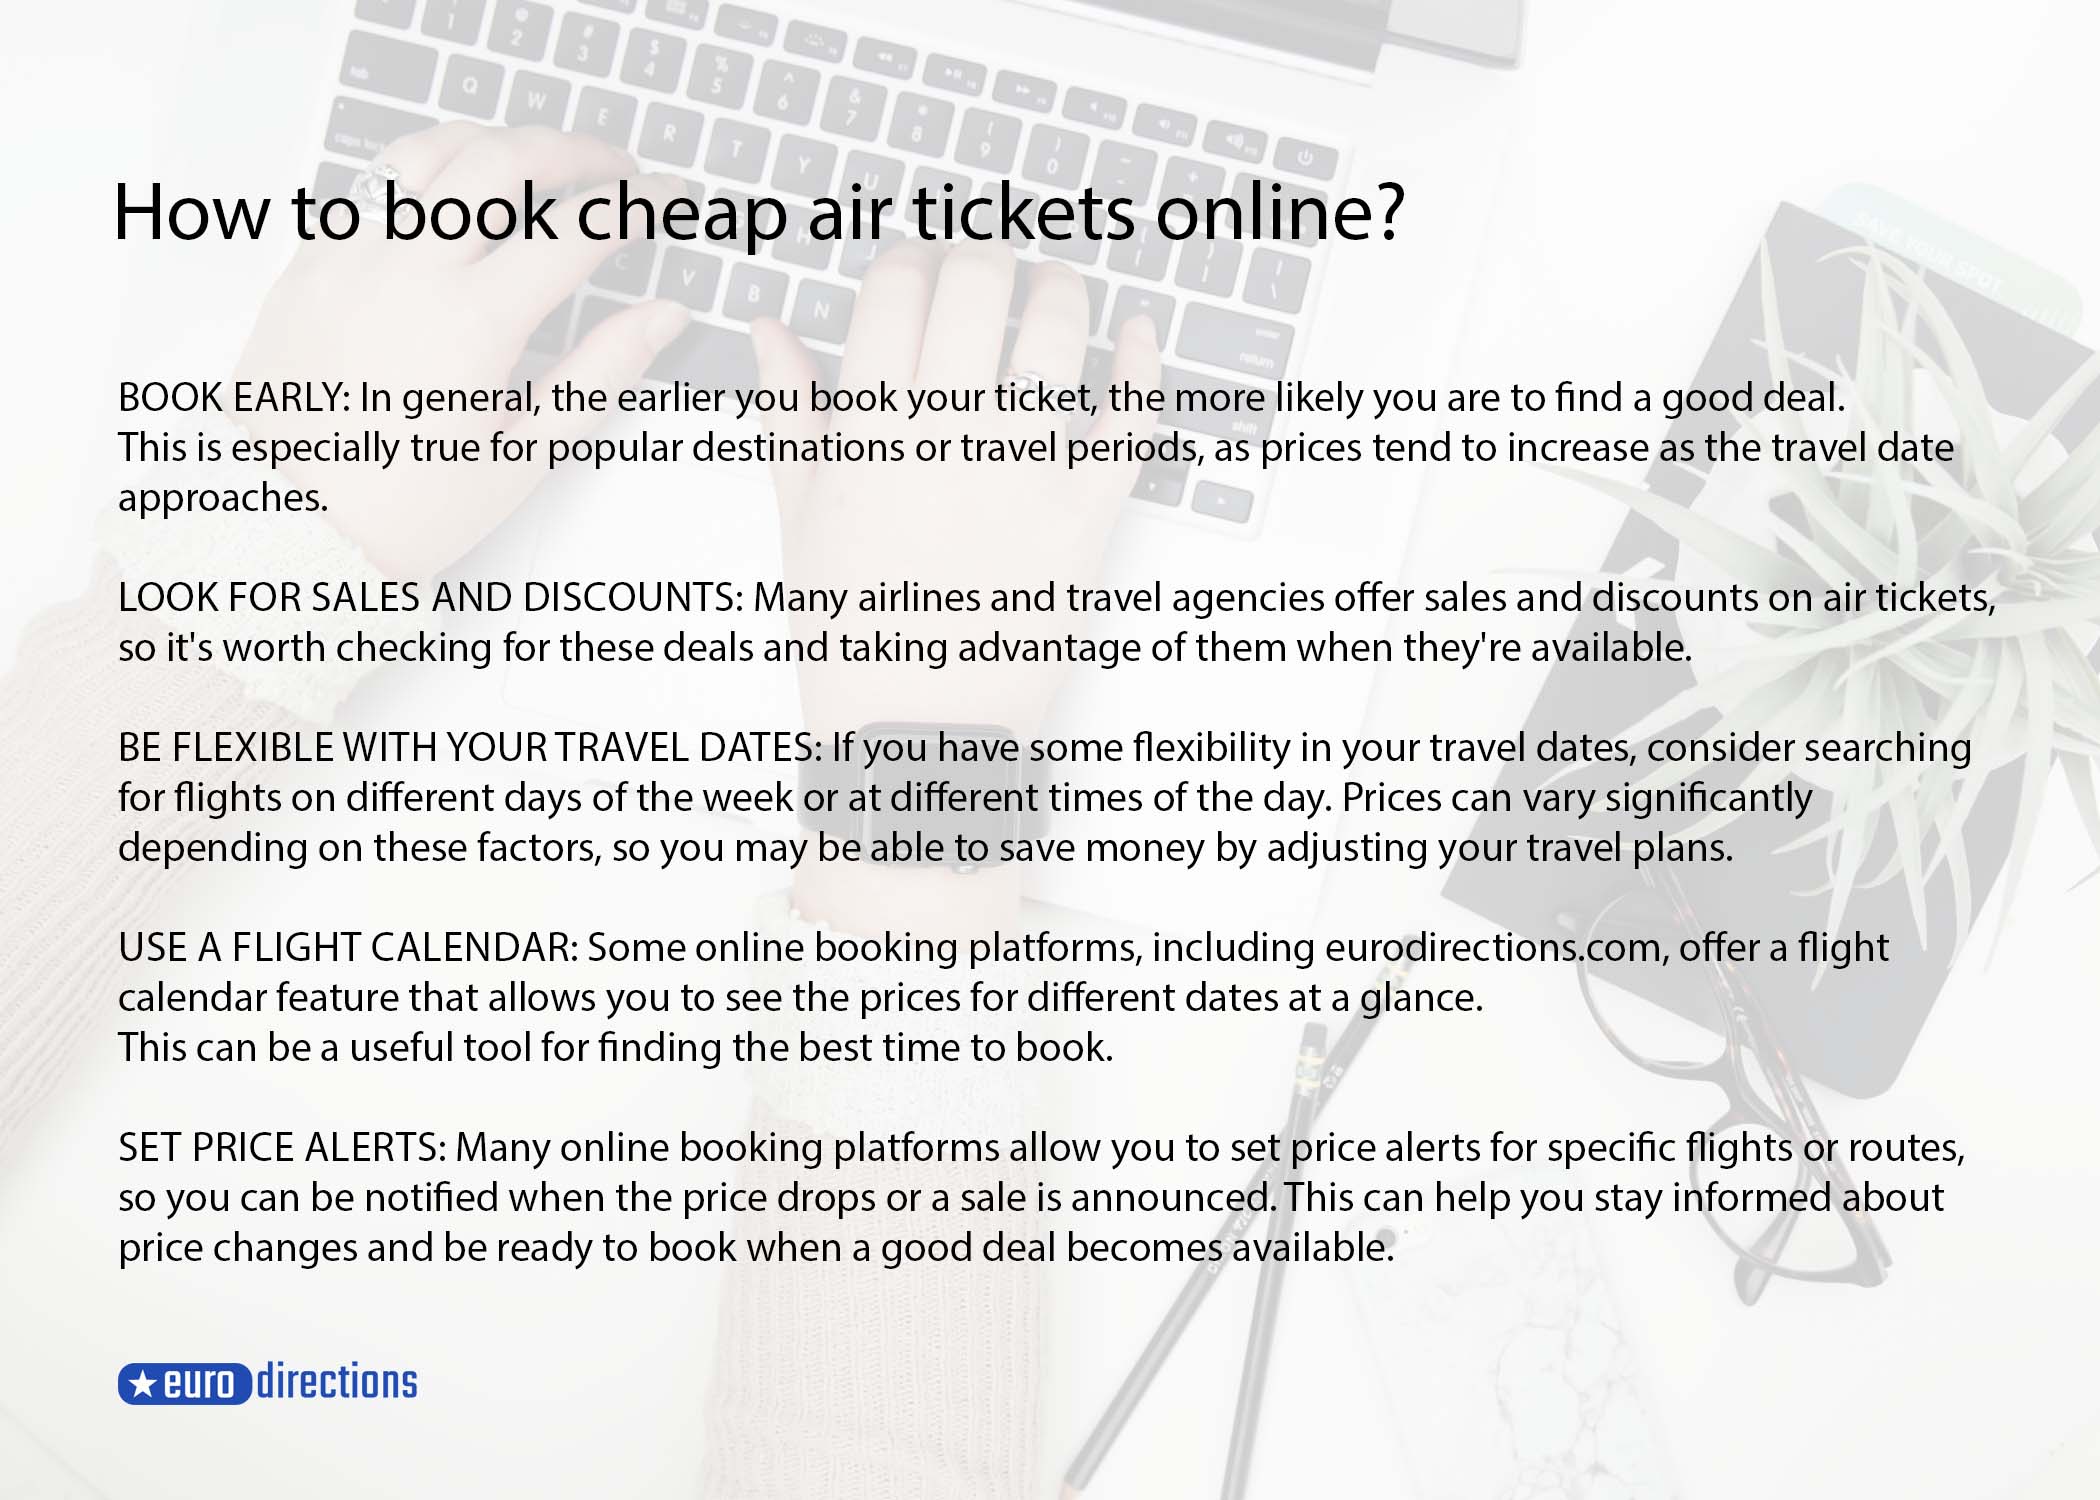 How to find cheap air tickets online